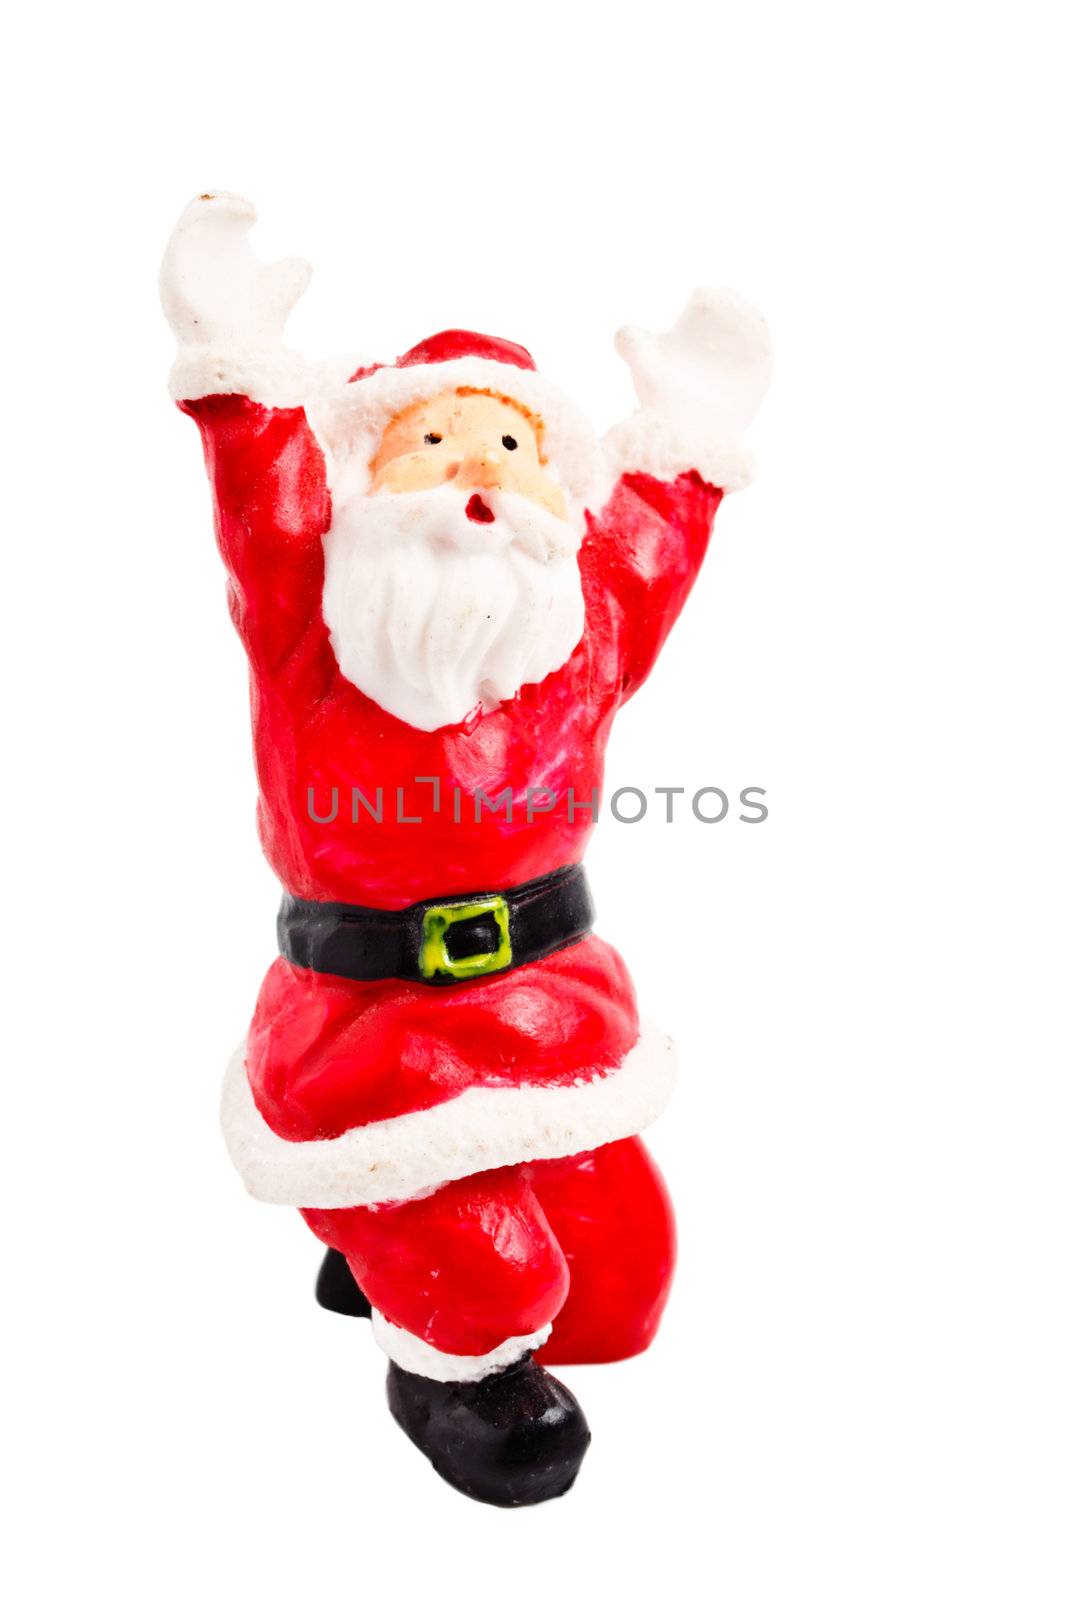 Santa Clause figurine isolated by dimol